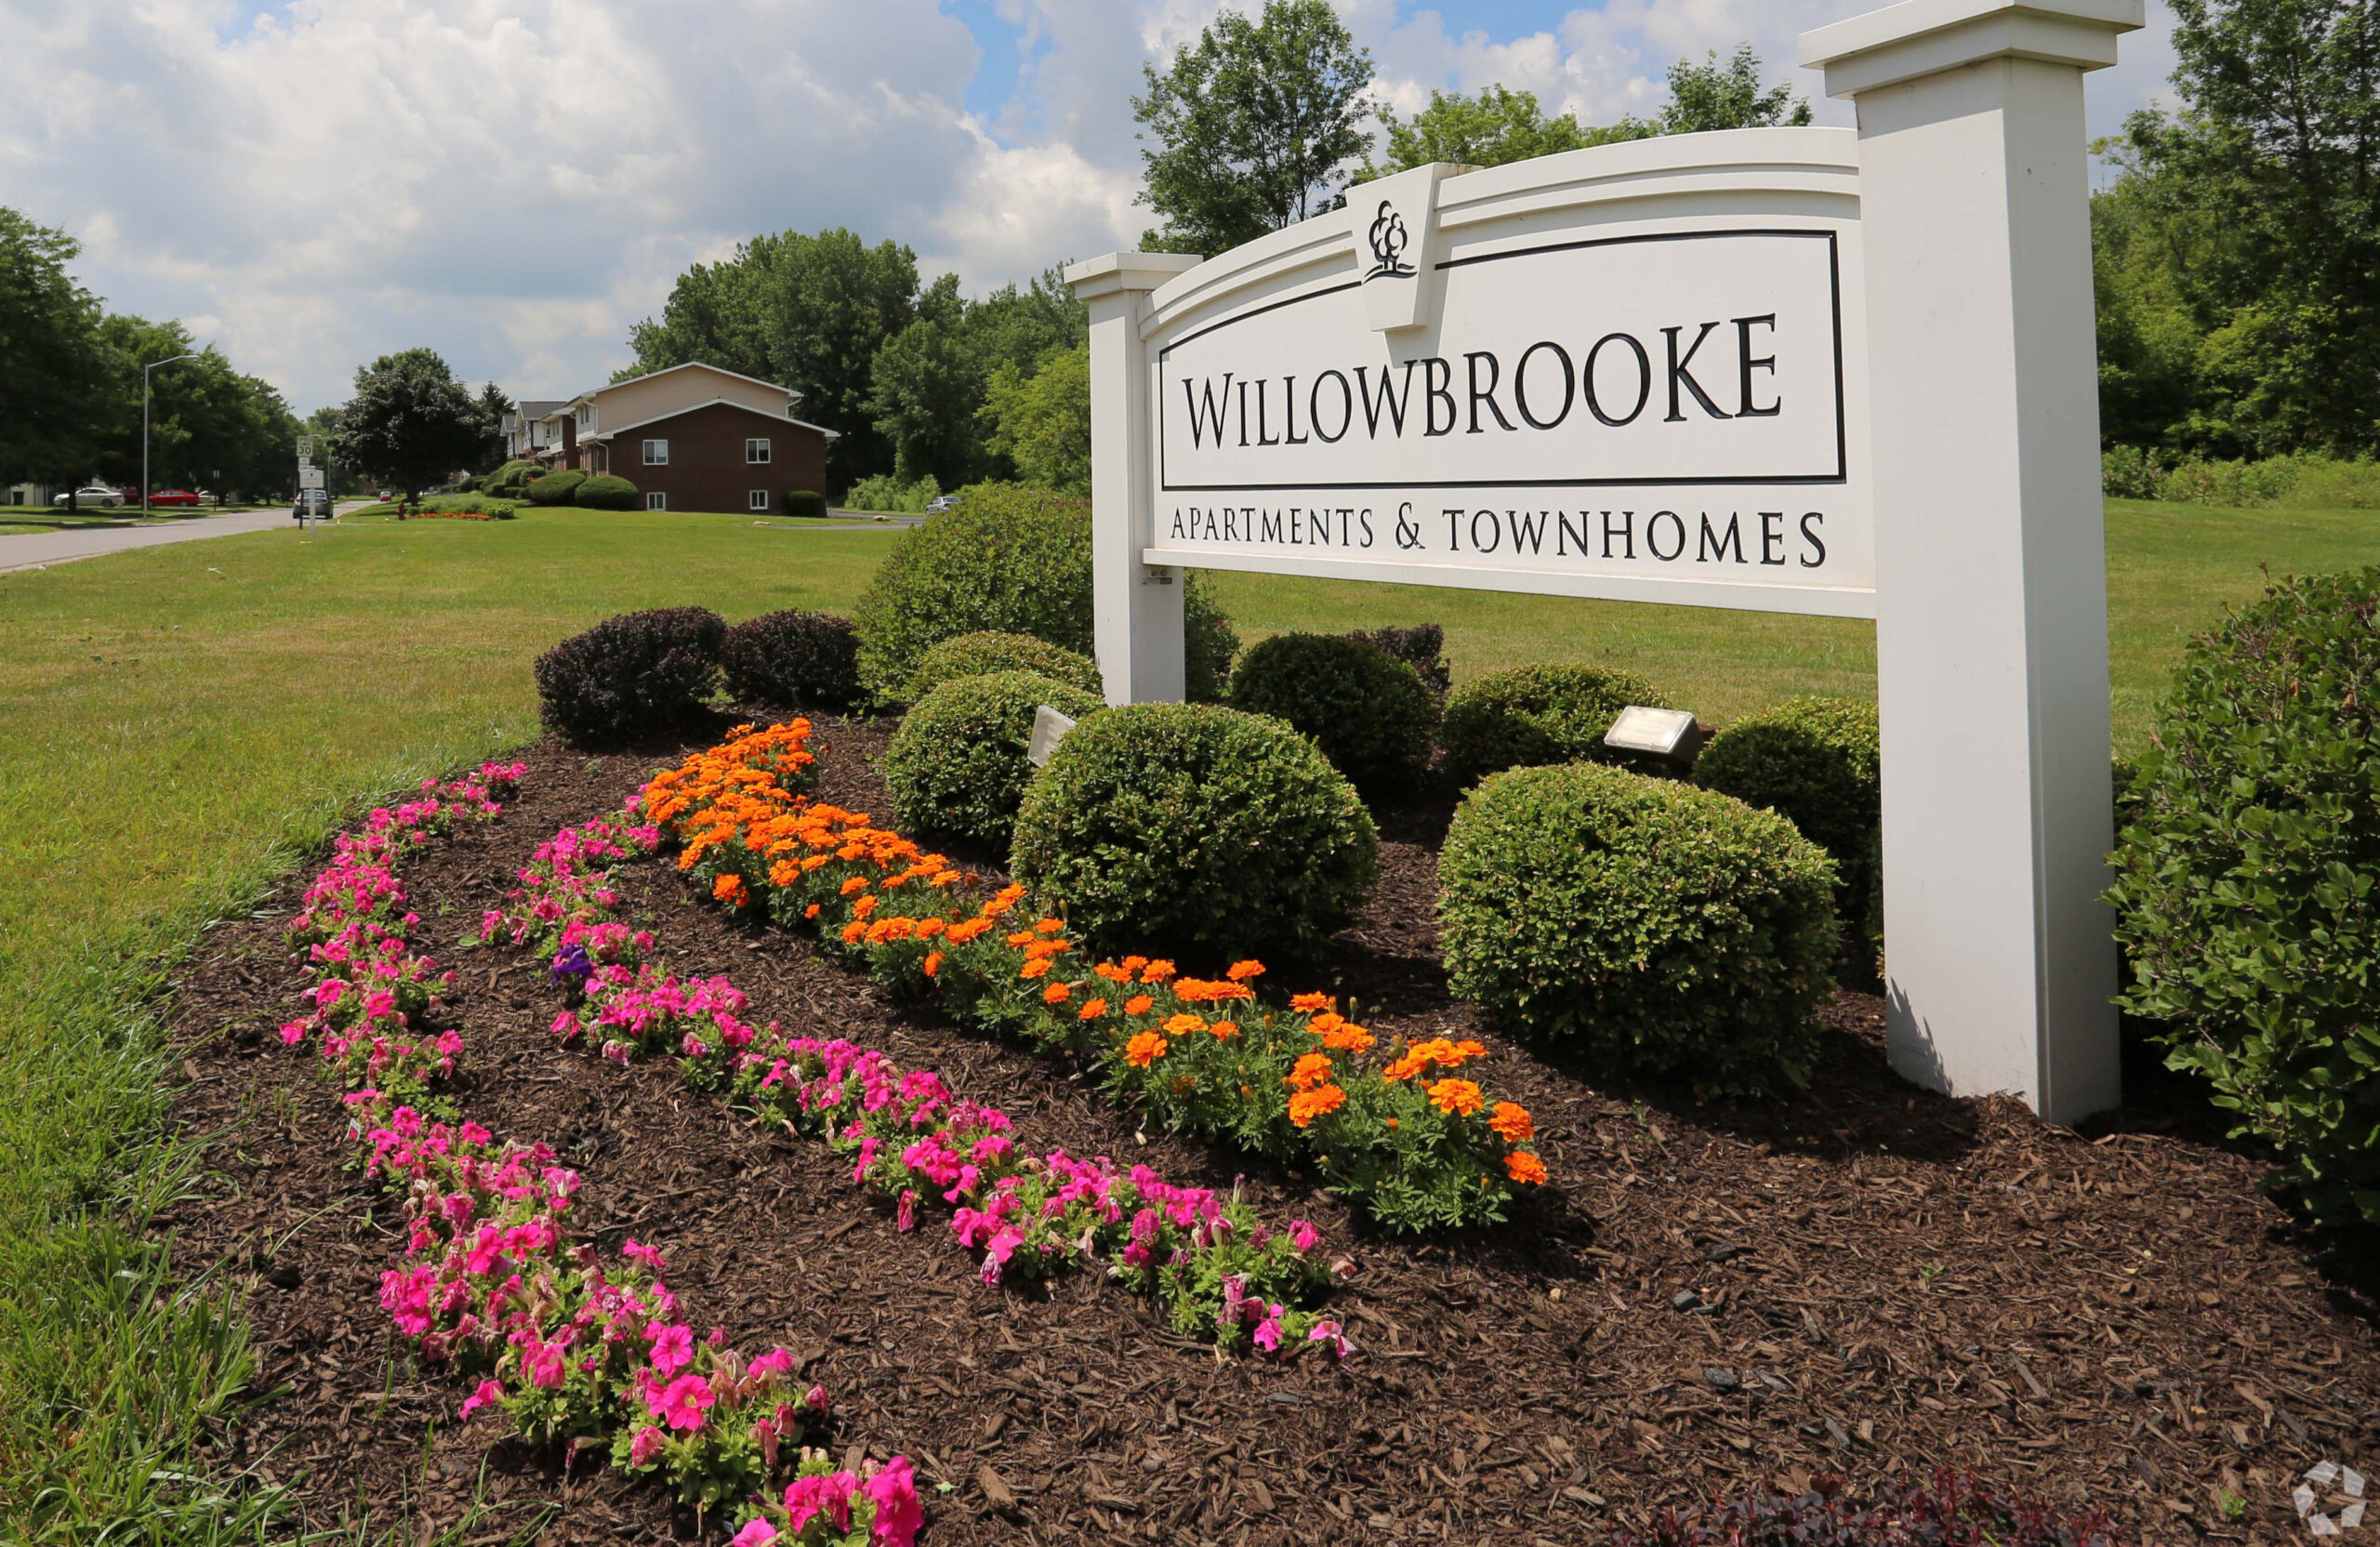 Willowbrooke apartments and townhomes sign